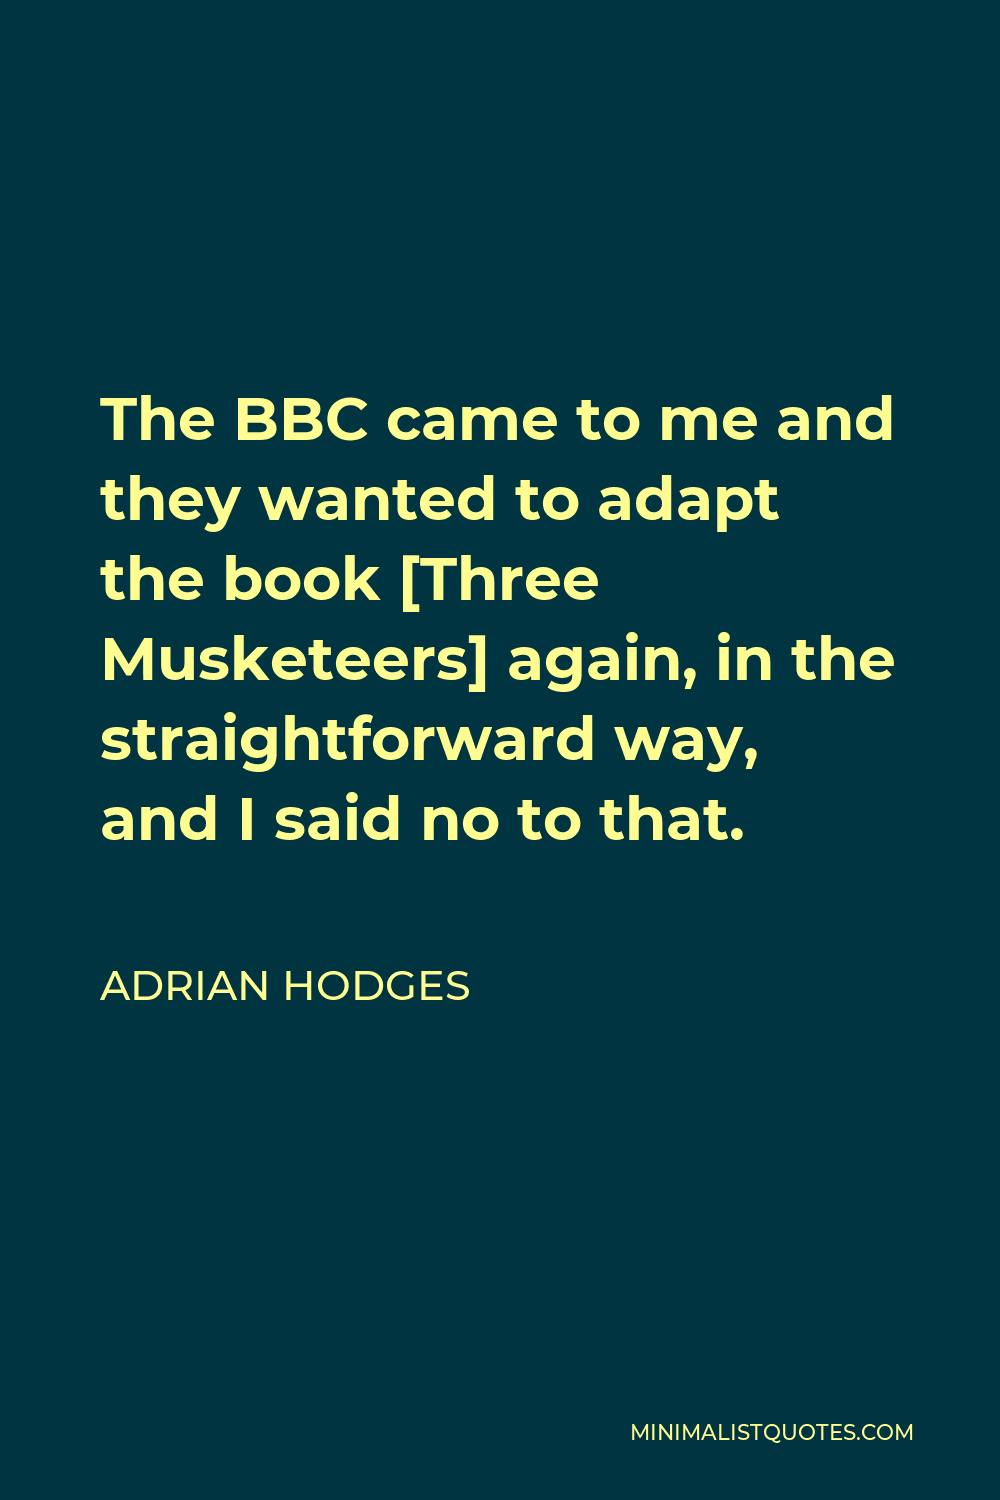 Adrian Hodges Quote - The BBC came to me and they wanted to adapt the book [Three Musketeers] again, in the straightforward way, and I said no to that.